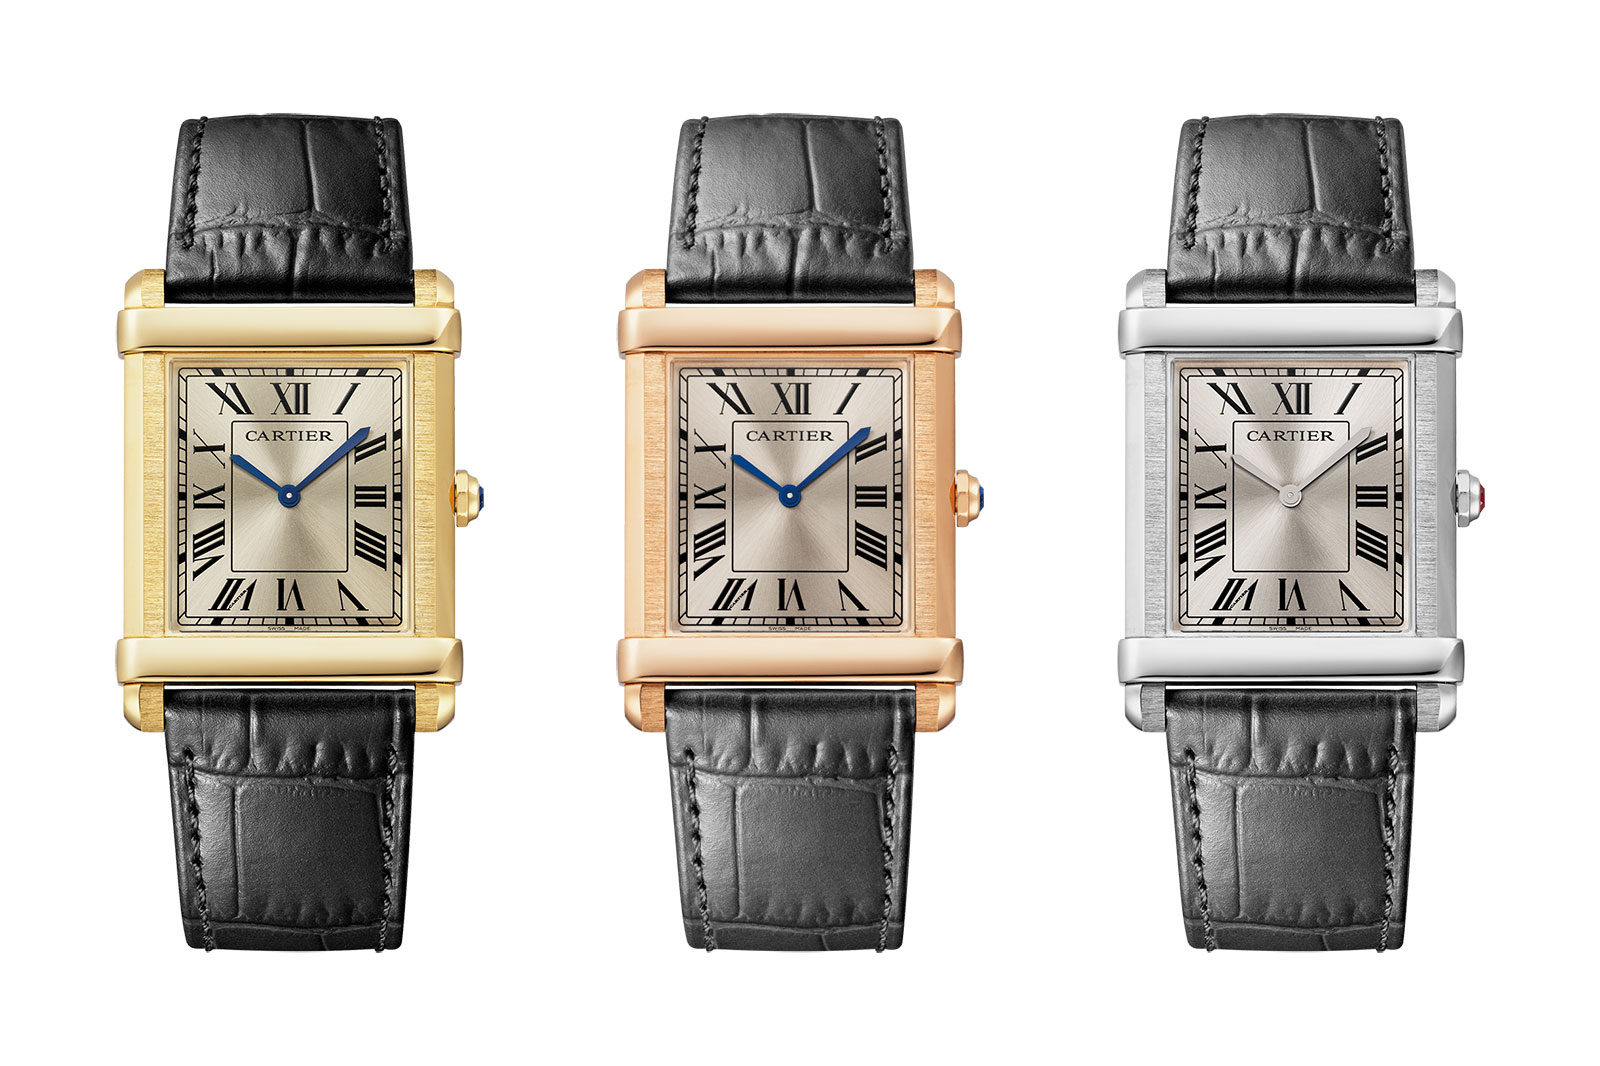 Cartier Introduces the Cartier Privé Tank Chinoise | SJX Watches